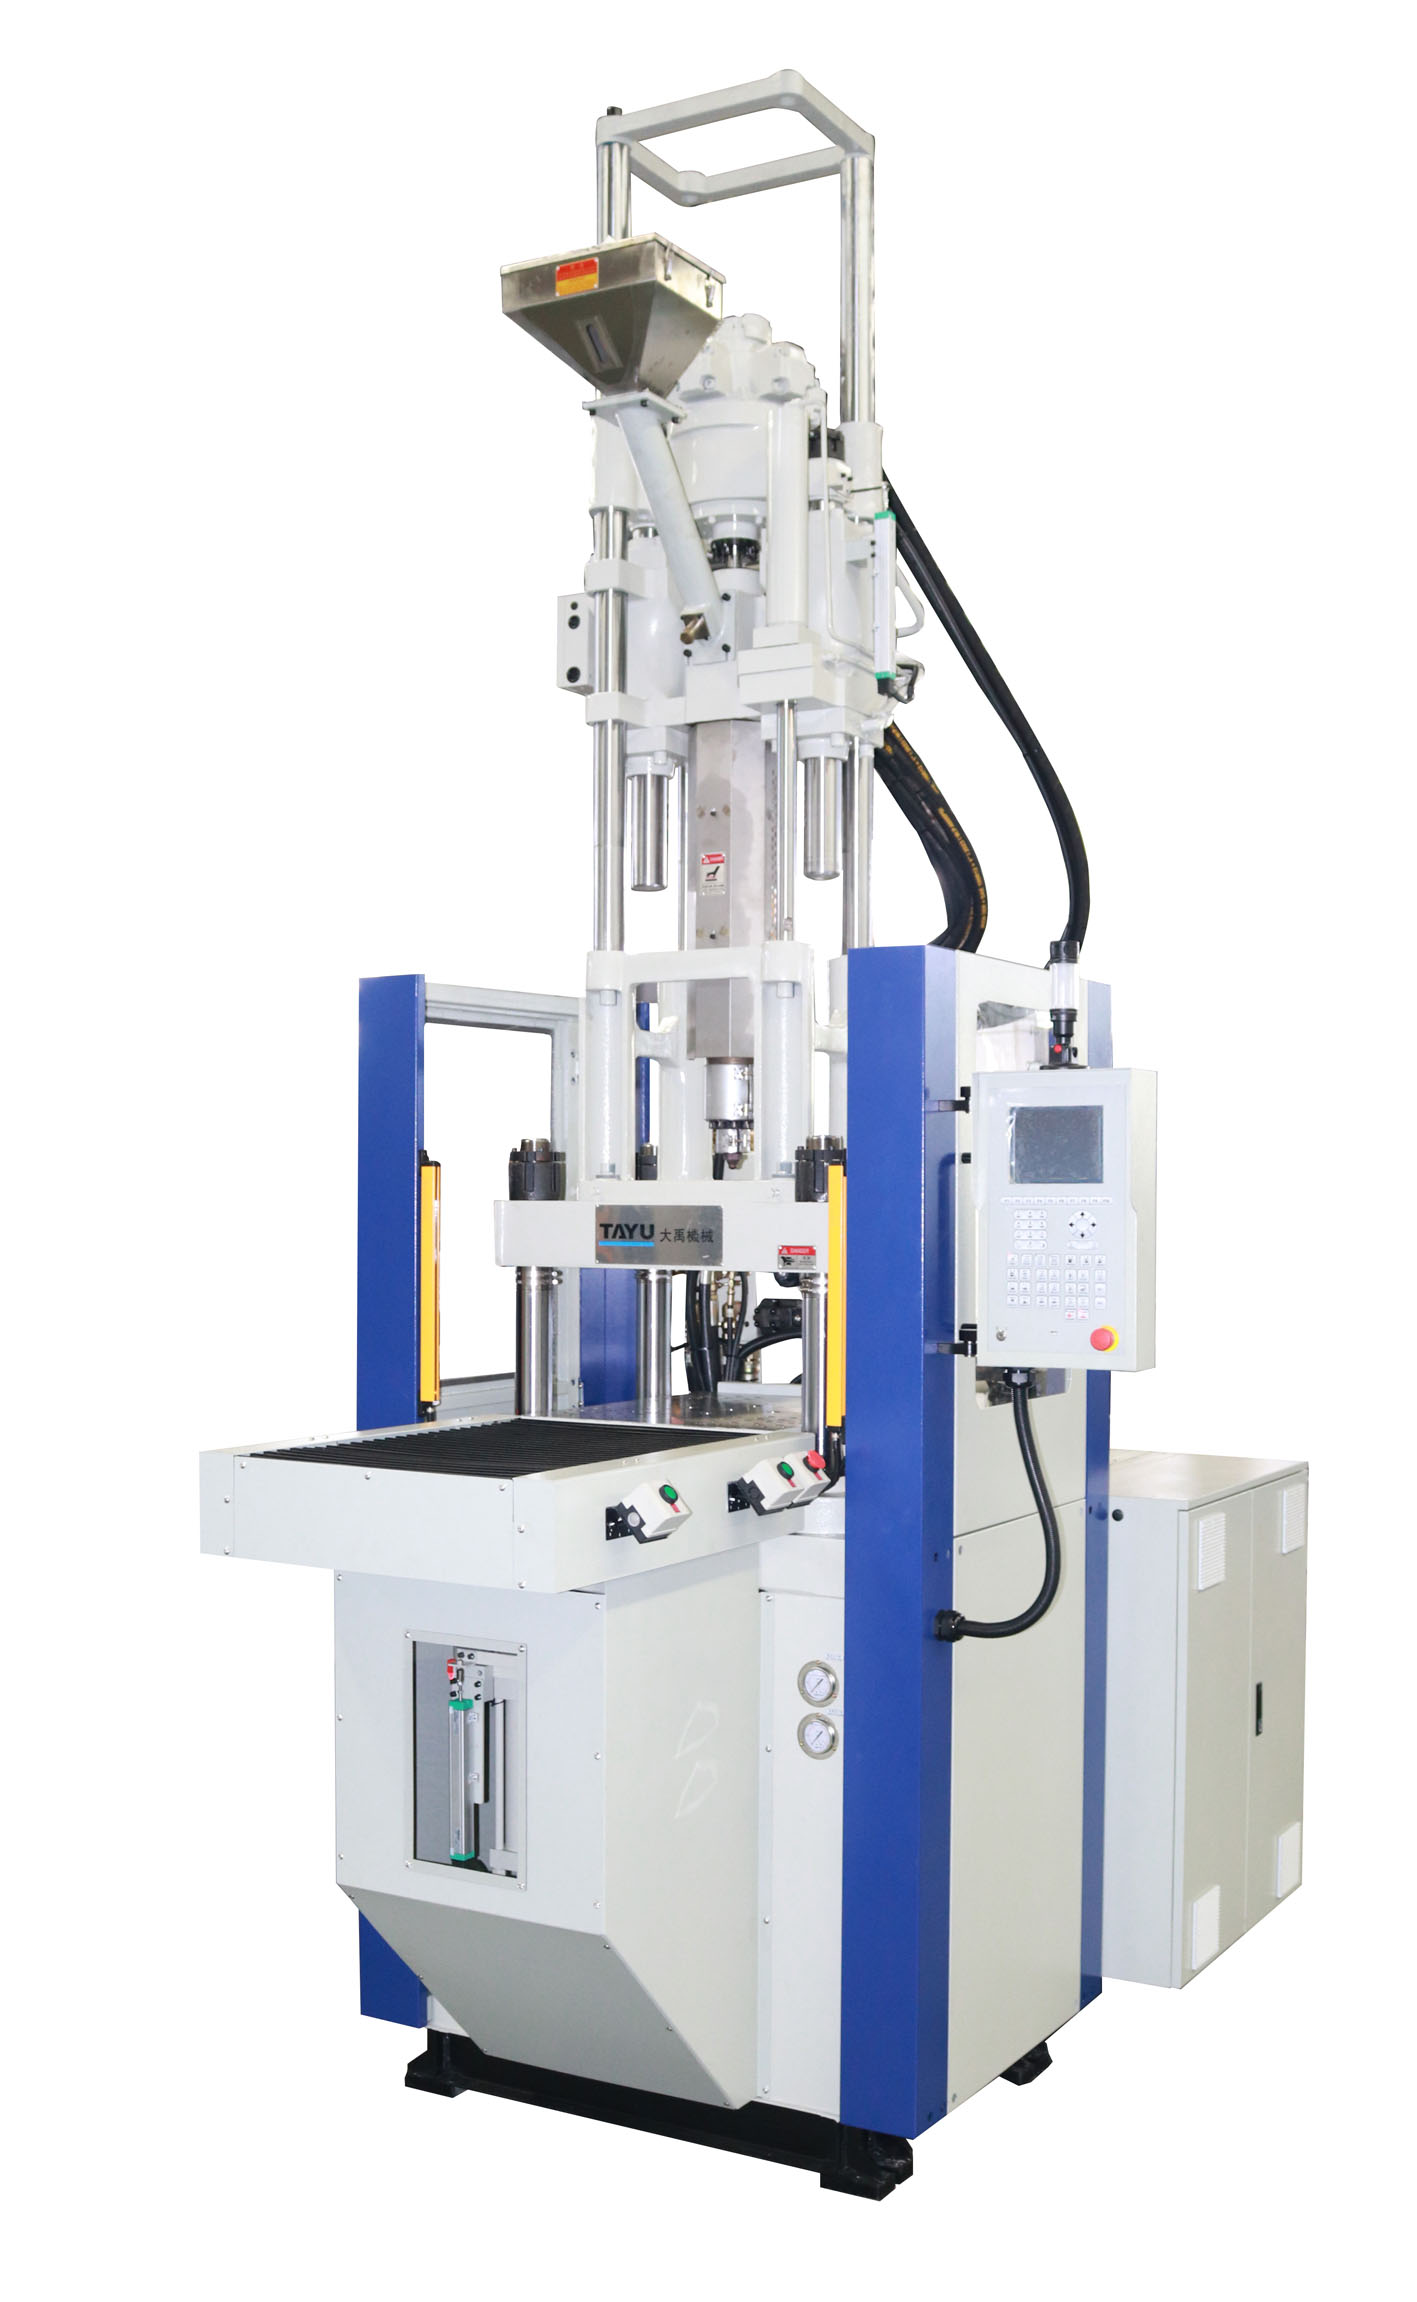 TY-1200S vertical injection molding machine